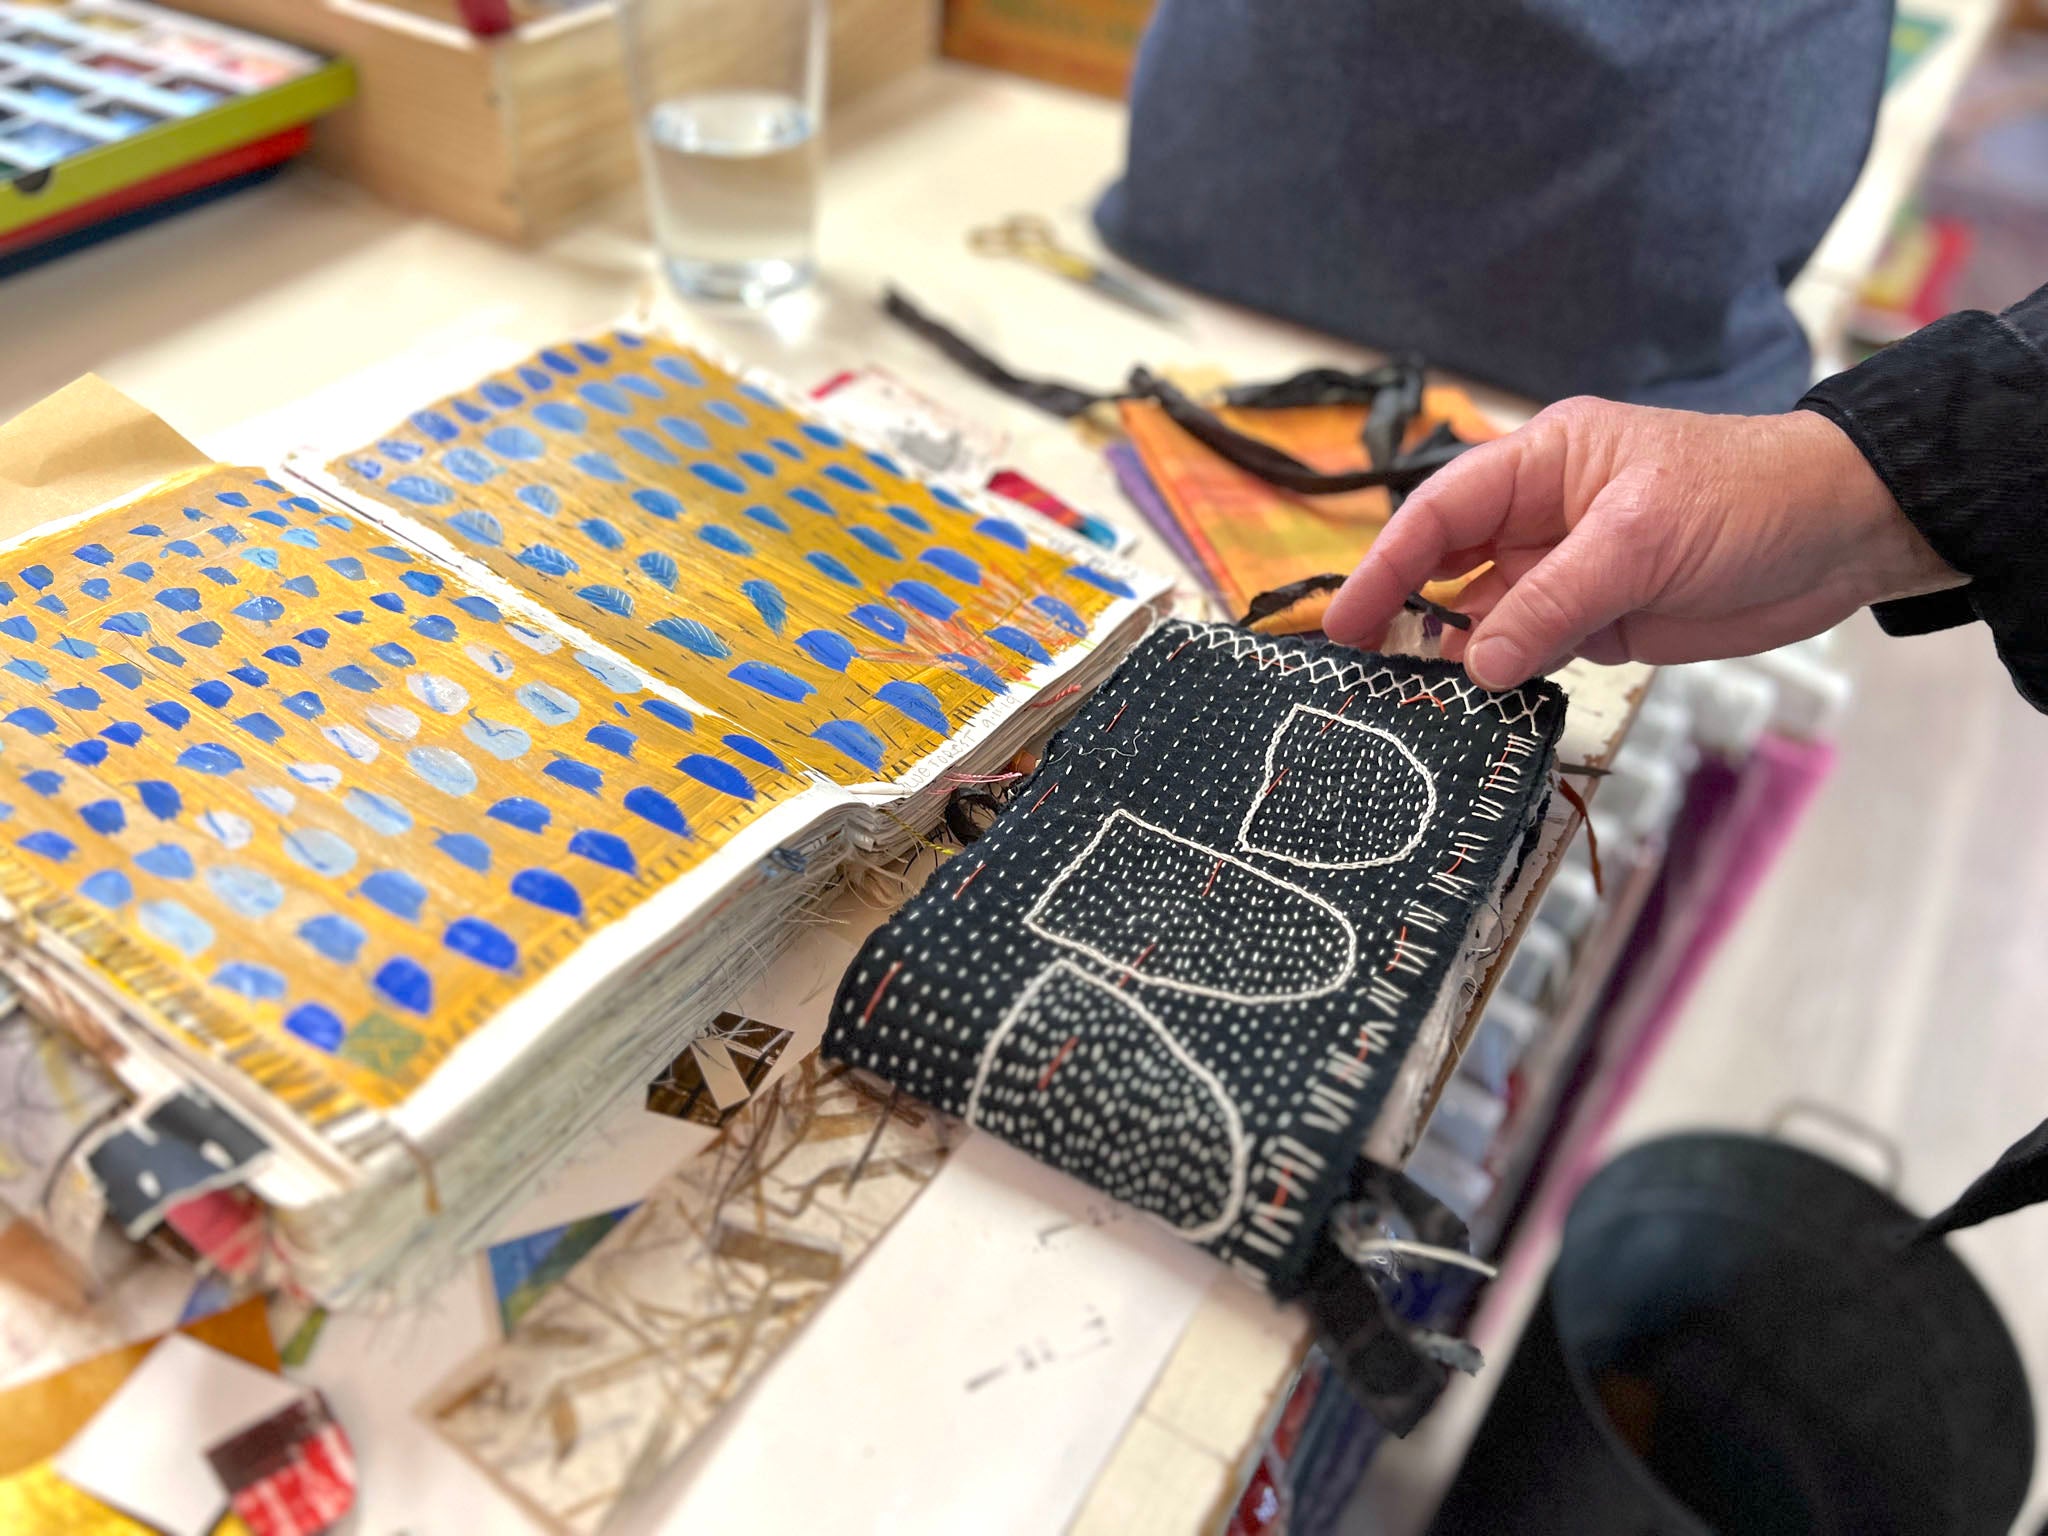 Hand-made books by Marcia Derse